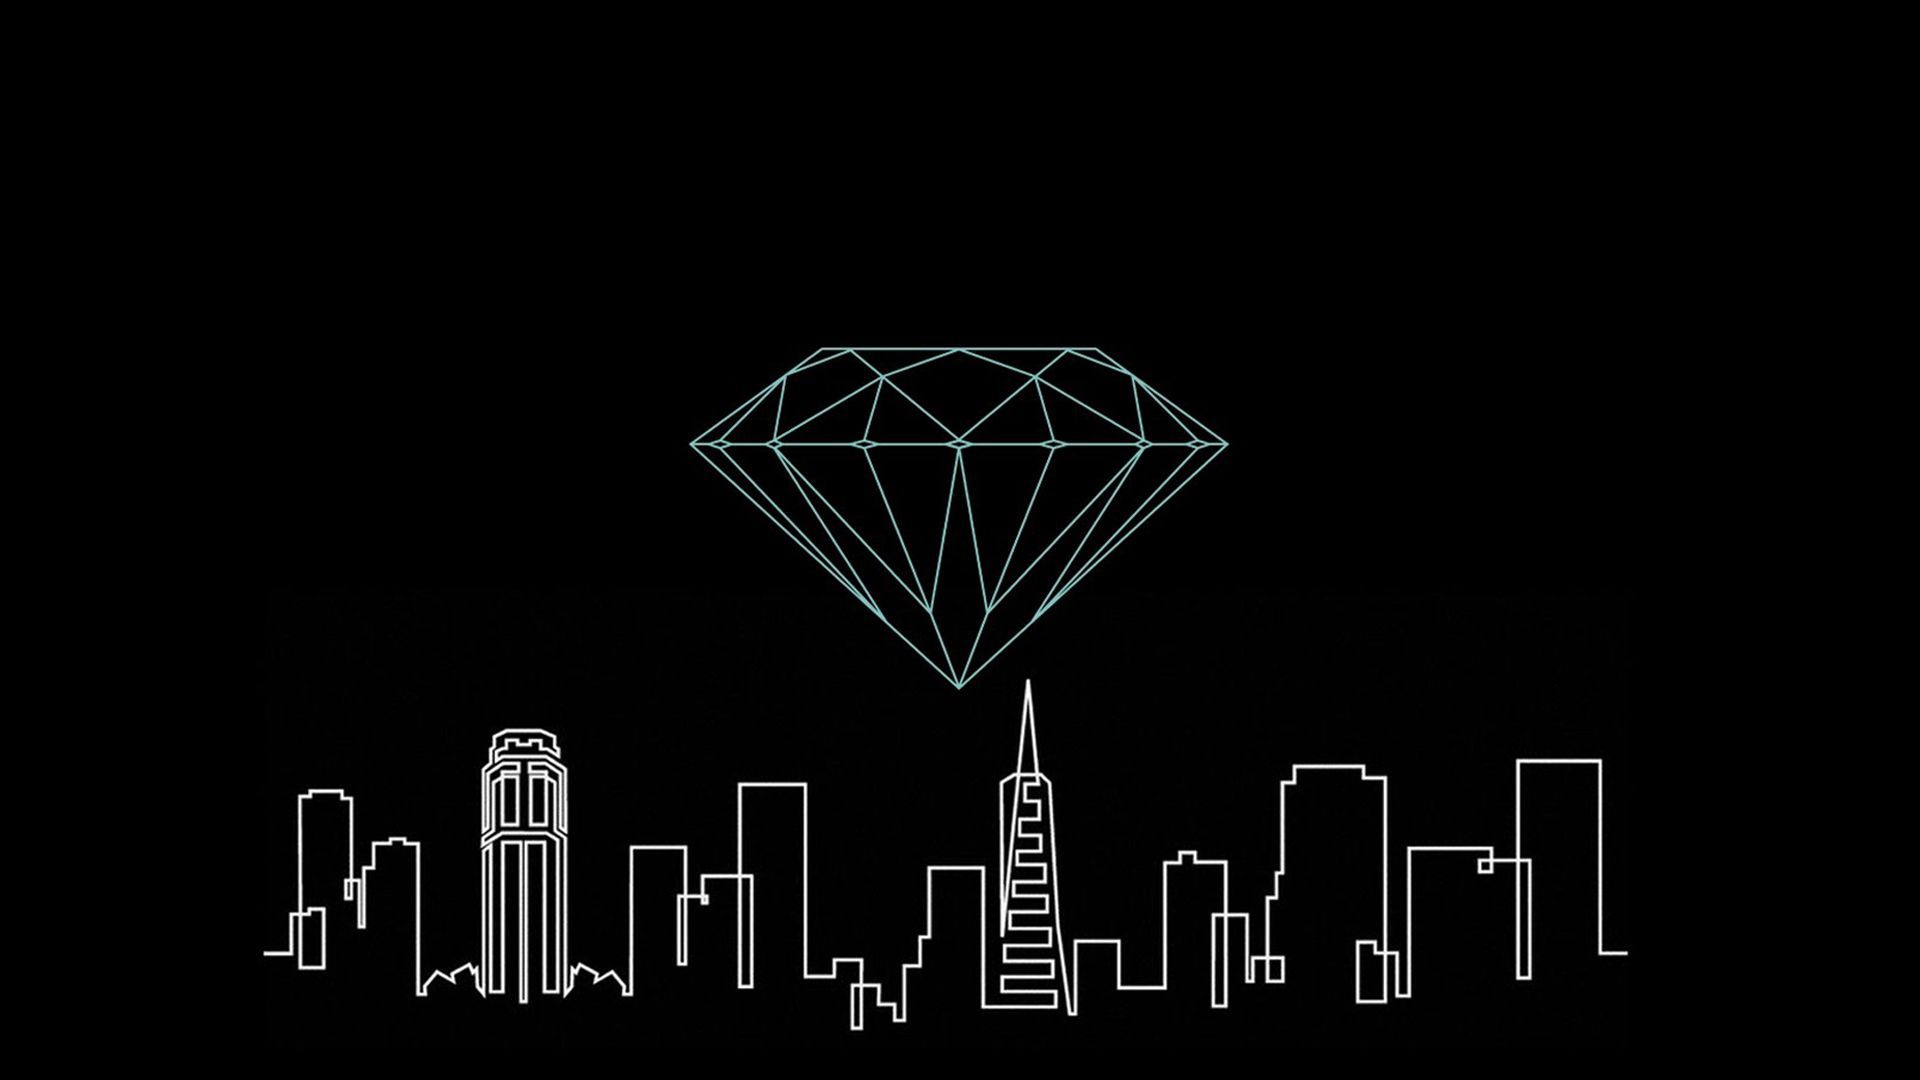 A diamond shaped image with the city in it - Diamond, black, HD, city